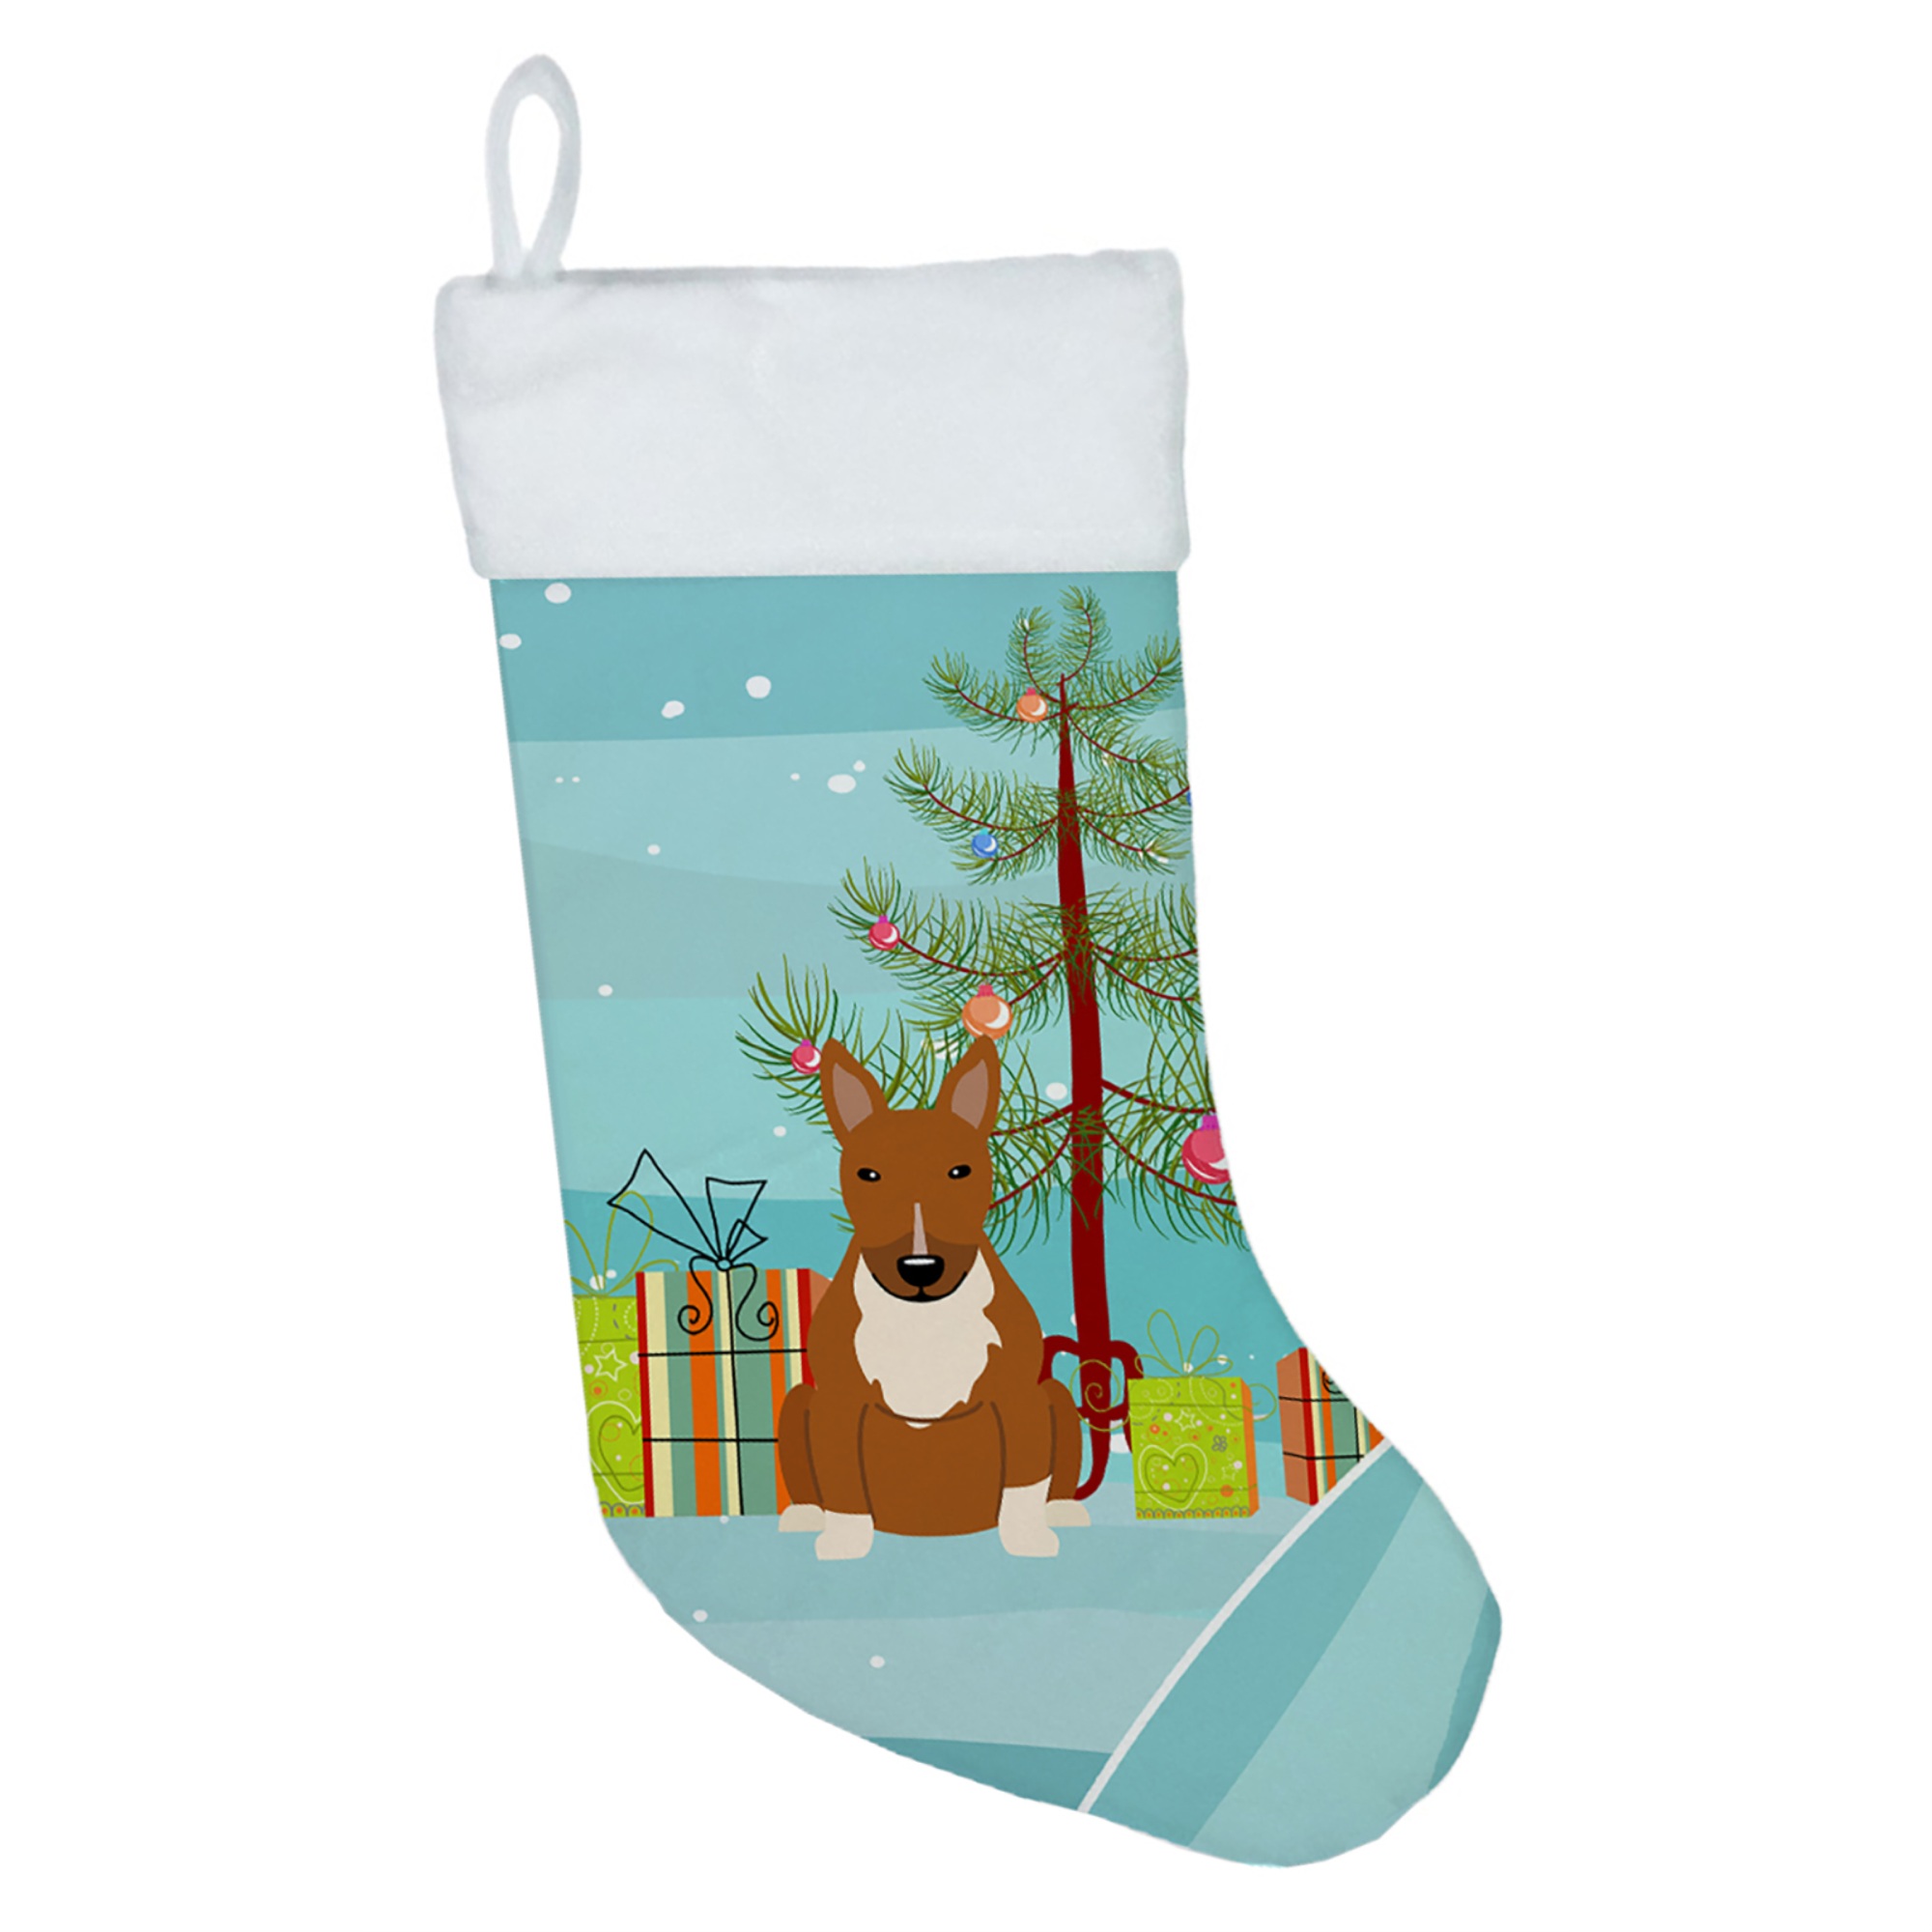 Caroline's Treasures "Caroline's Treasures Merry Christmas Tree Bull Terrier Red Stocking, Large, Multicolor"